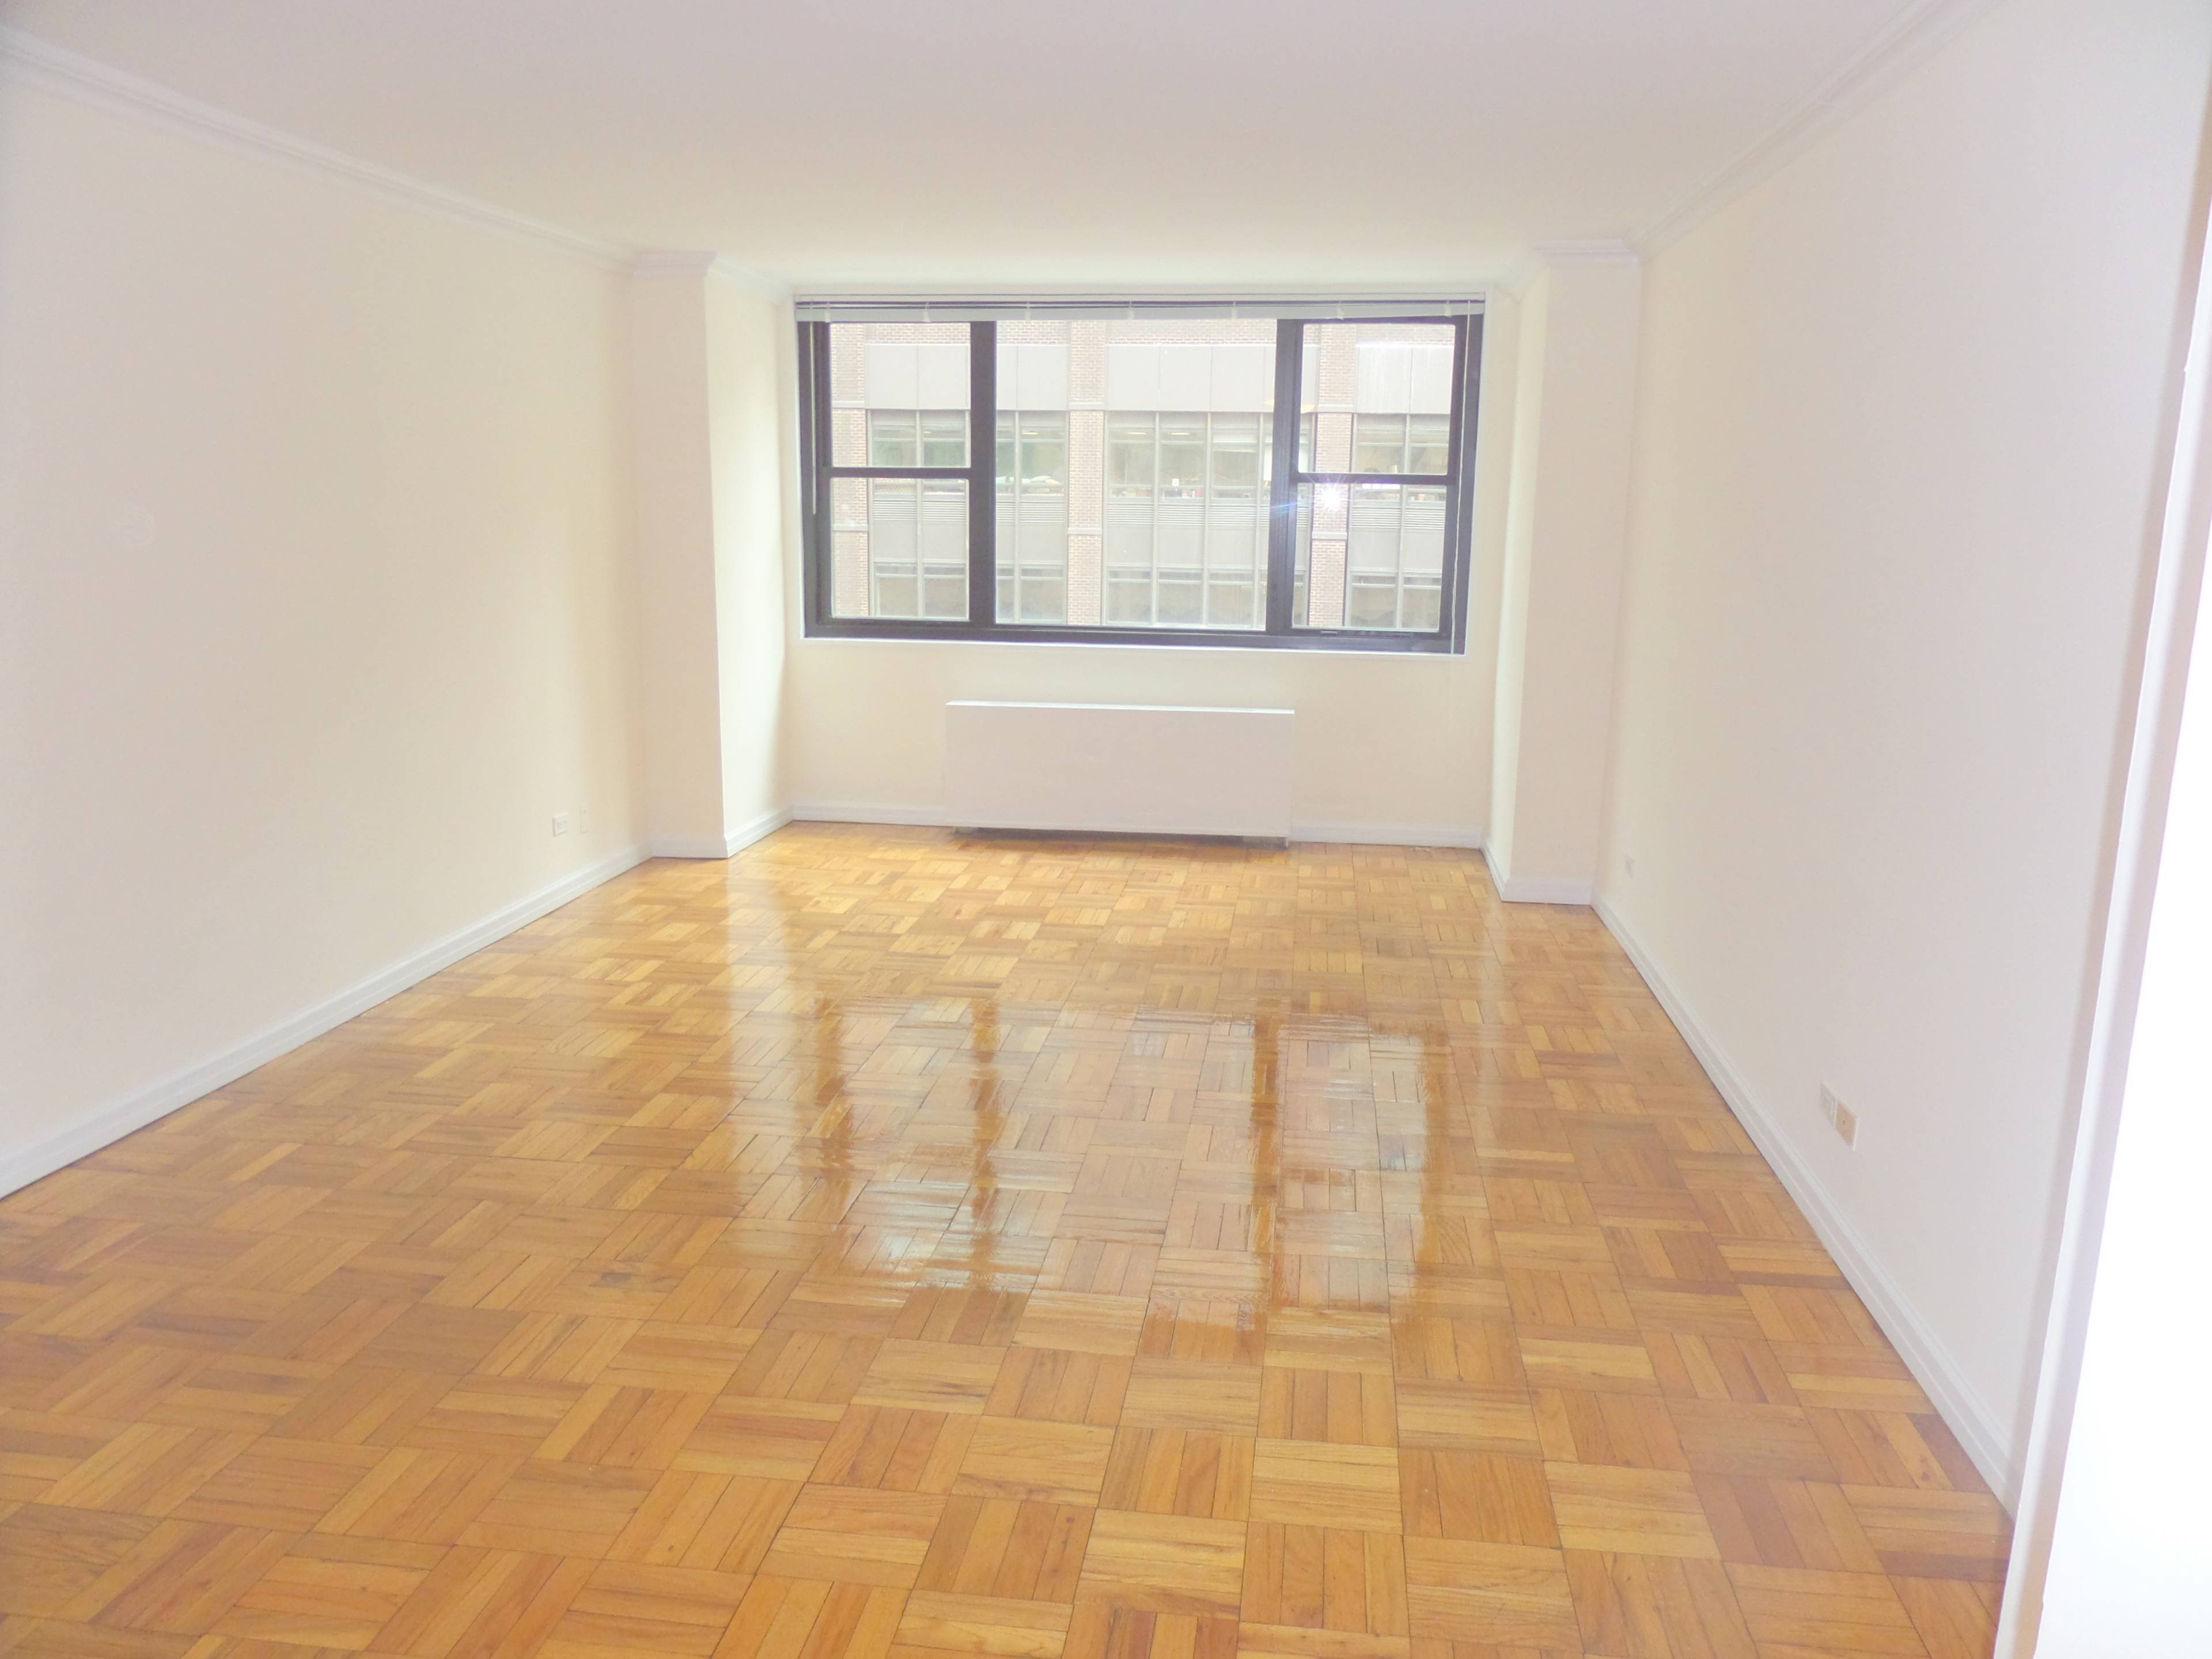 NO FEE ACT FAST Prime Location Hell's Kitchen/ Clinton has Spacious Studio and futures  Ample Closet Space, Hardwood Floors, Renovated Granite Bathroom, 